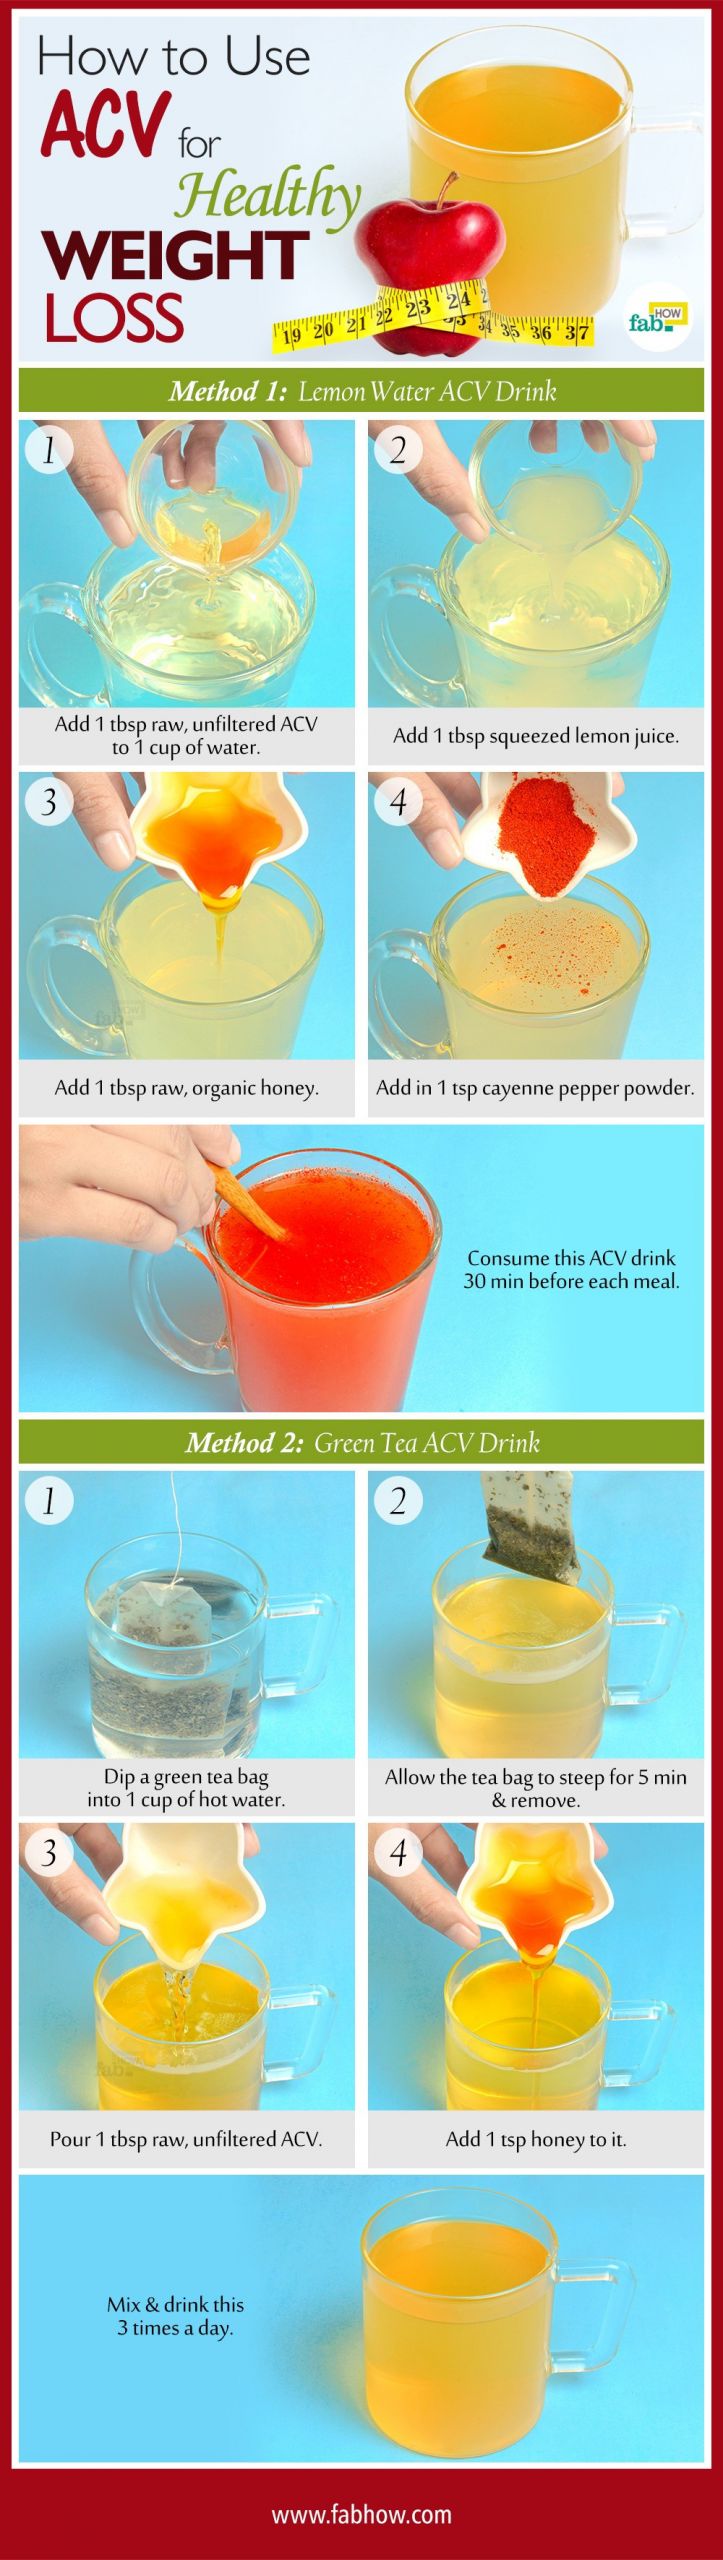 Honey And Apple Cider Vinegar For Weight Loss
 How to Use Apple Cider Vinegar for Weight Loss